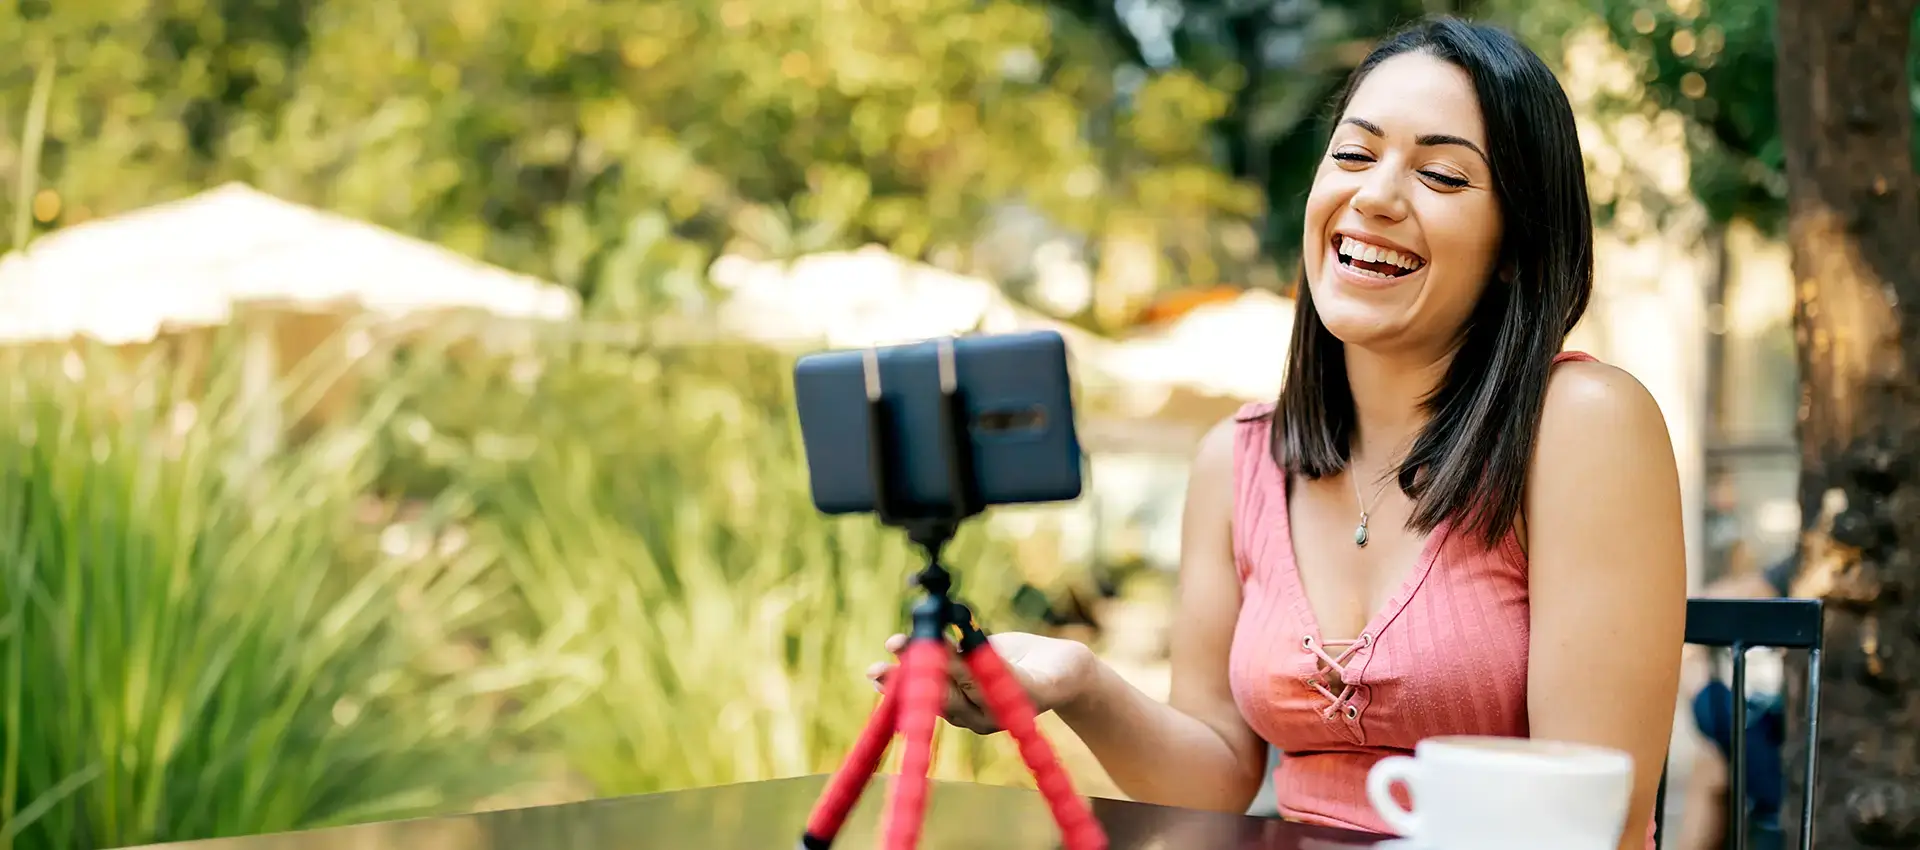 A hispanic woman sitting outside and smiling while having a video call through her smartphone on a tripod.